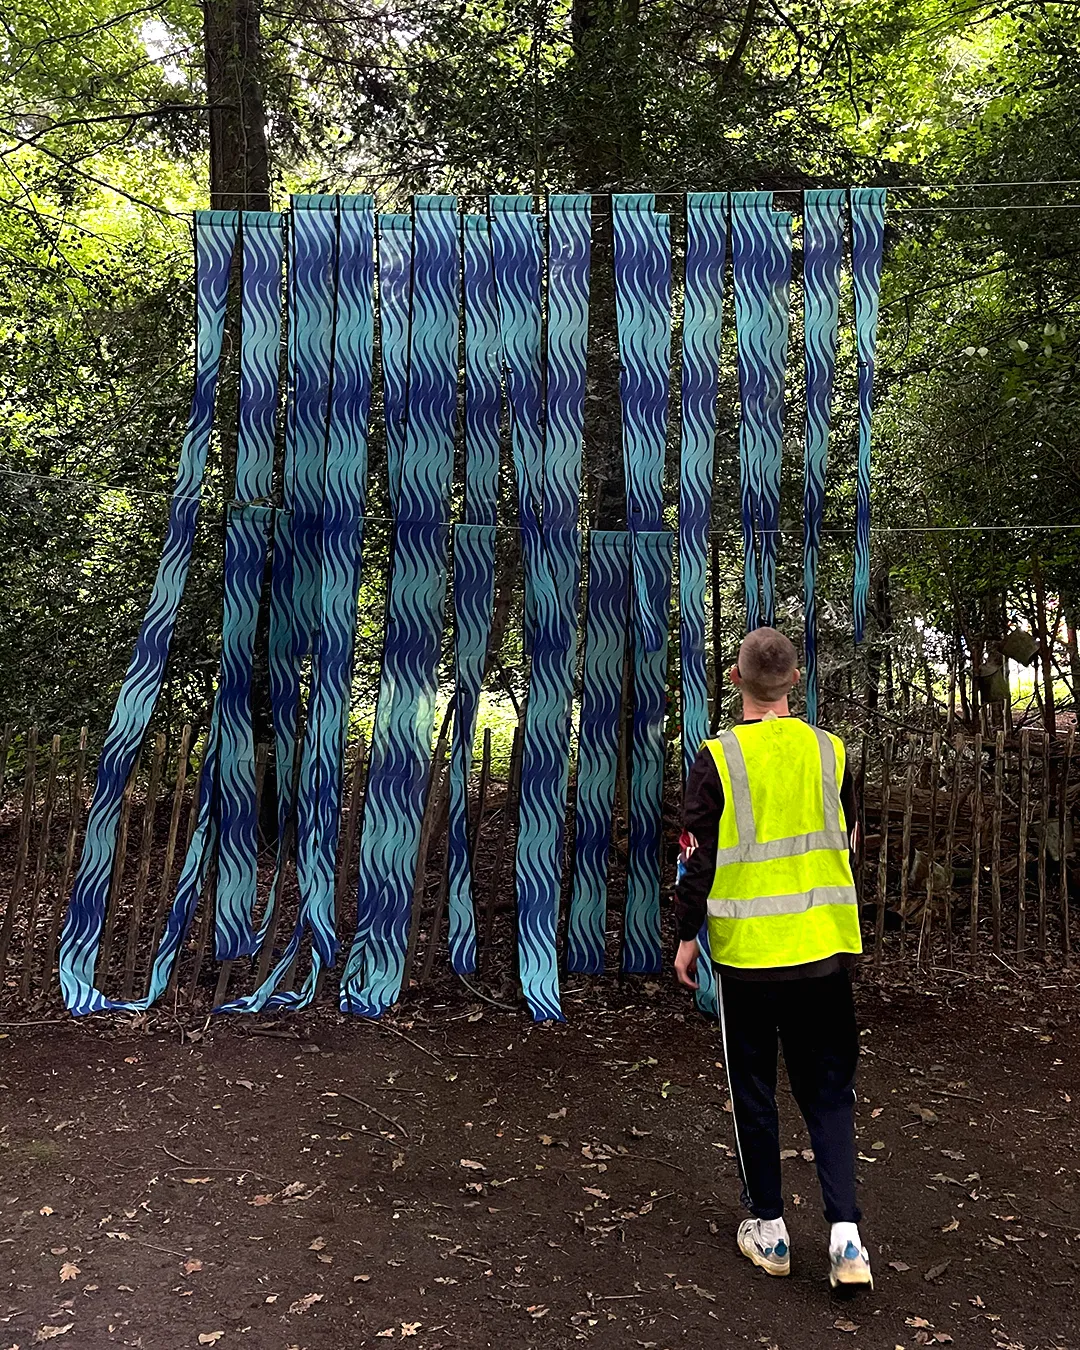 A sculpture in a forest. It is made of long strips of a repeat pattern on flag material. The repeat design is seagreen and ultramarine blue waves. A man in a  high-vis jacket stands in front.